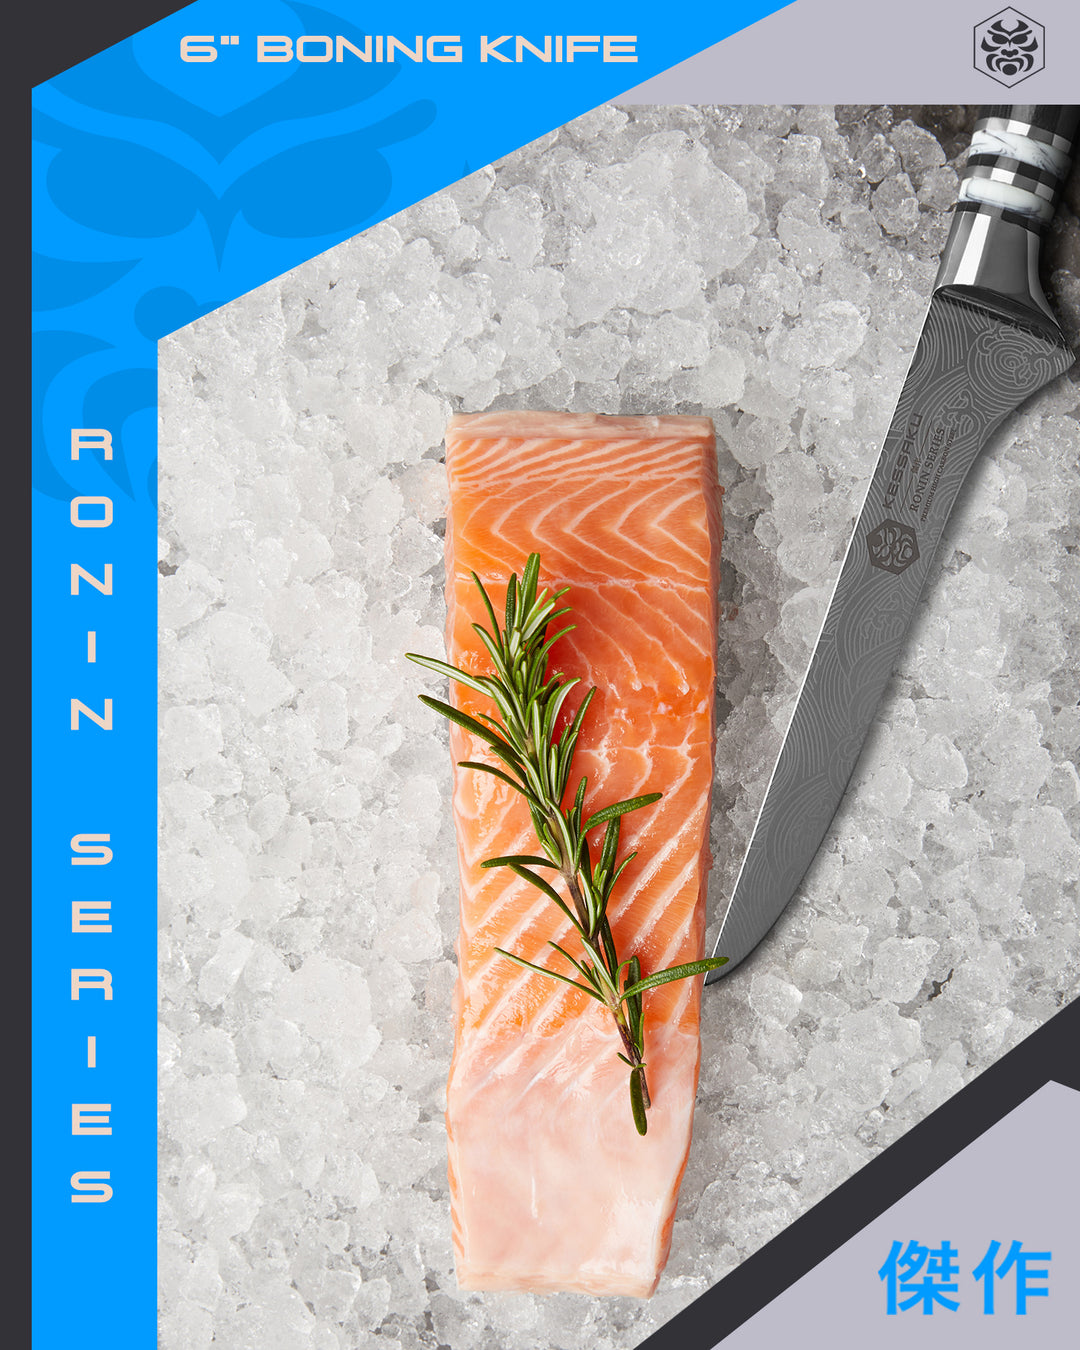 The Ronin Boning Knife and a deboned salmon steak with rosemary atop a bed of ice.